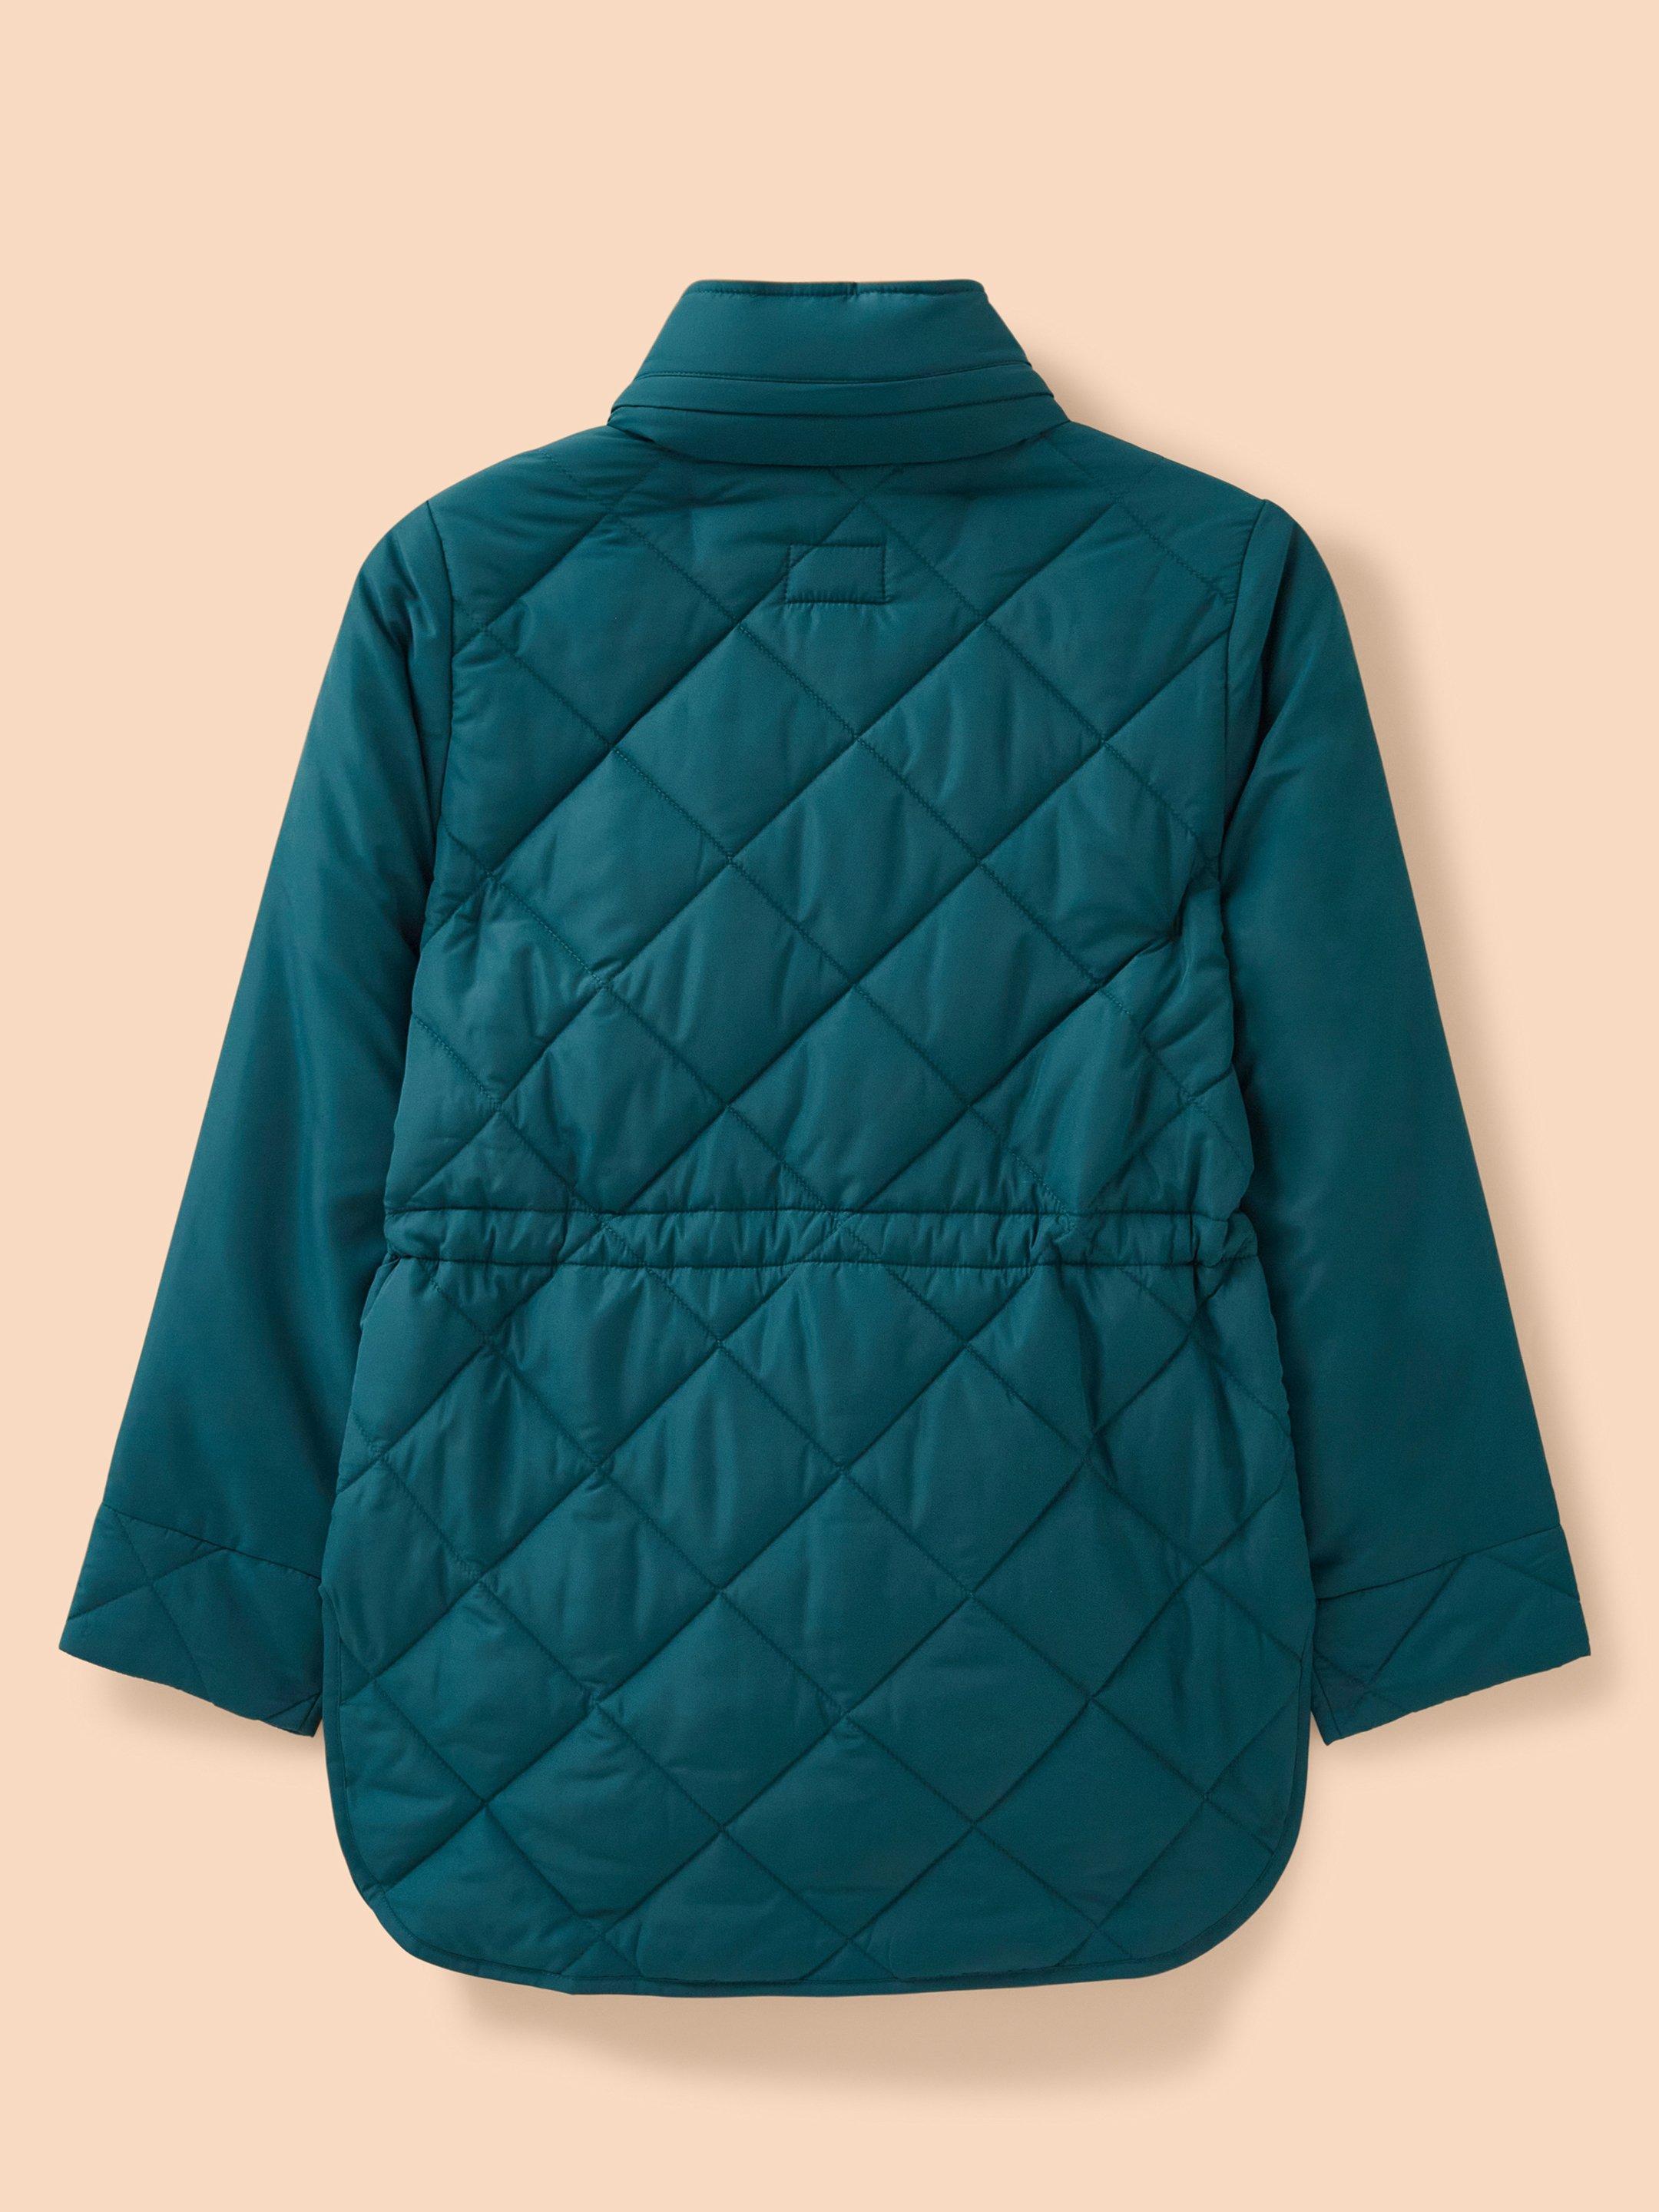 Emilia Quilted Long Sleeve Coat in DK TEAL - FLAT BACK